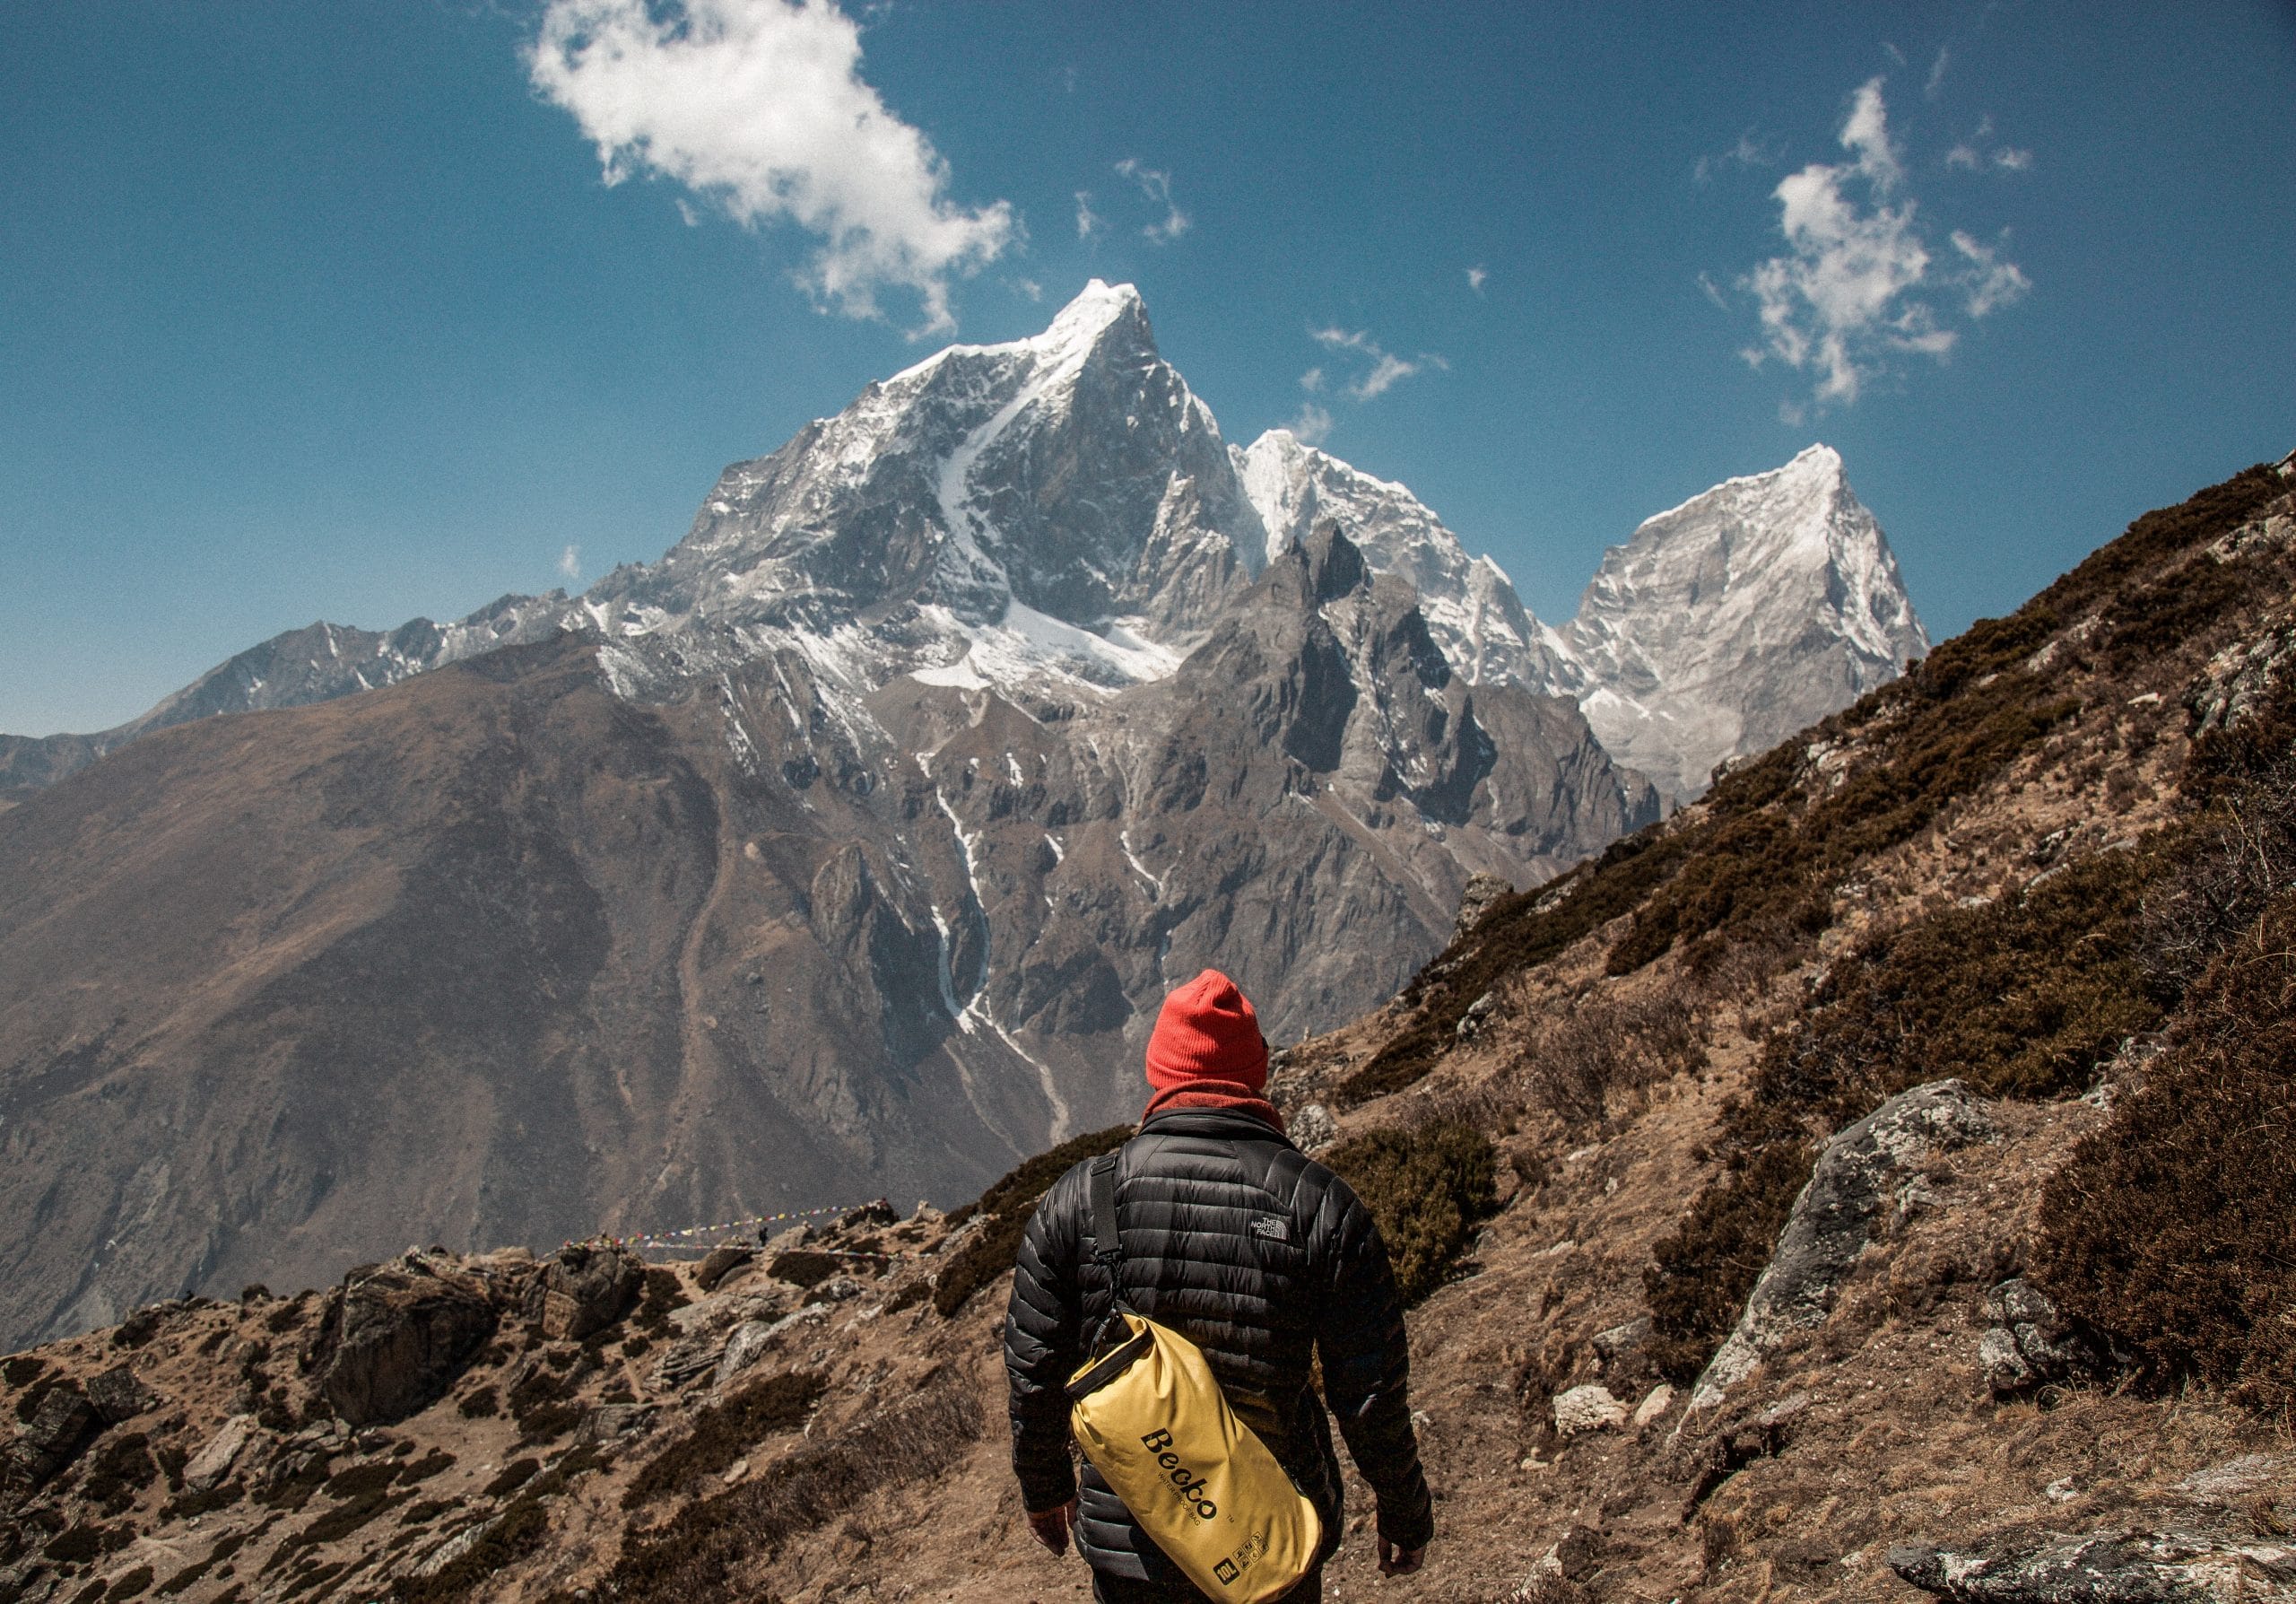 How Long Does It Take to Climb Everest? - Beezzly